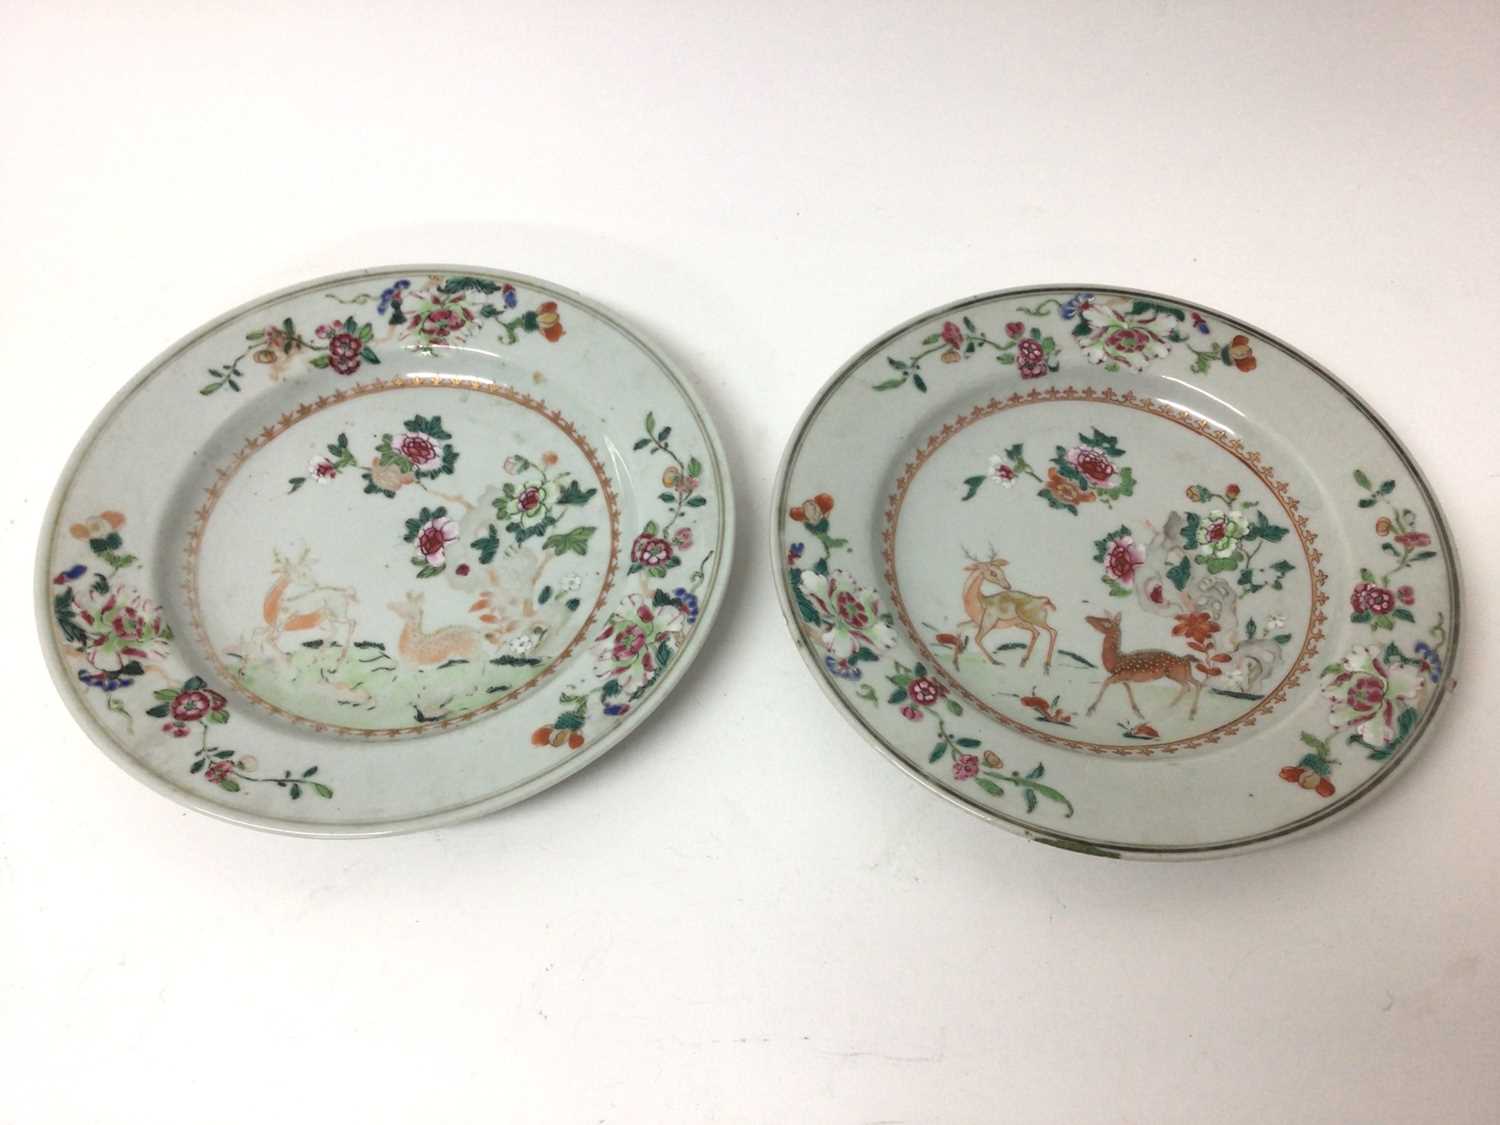 Lot 113 - Pair of 18th century Chinese famille rose porcelain plates, decorated with deer, 23cm diameter